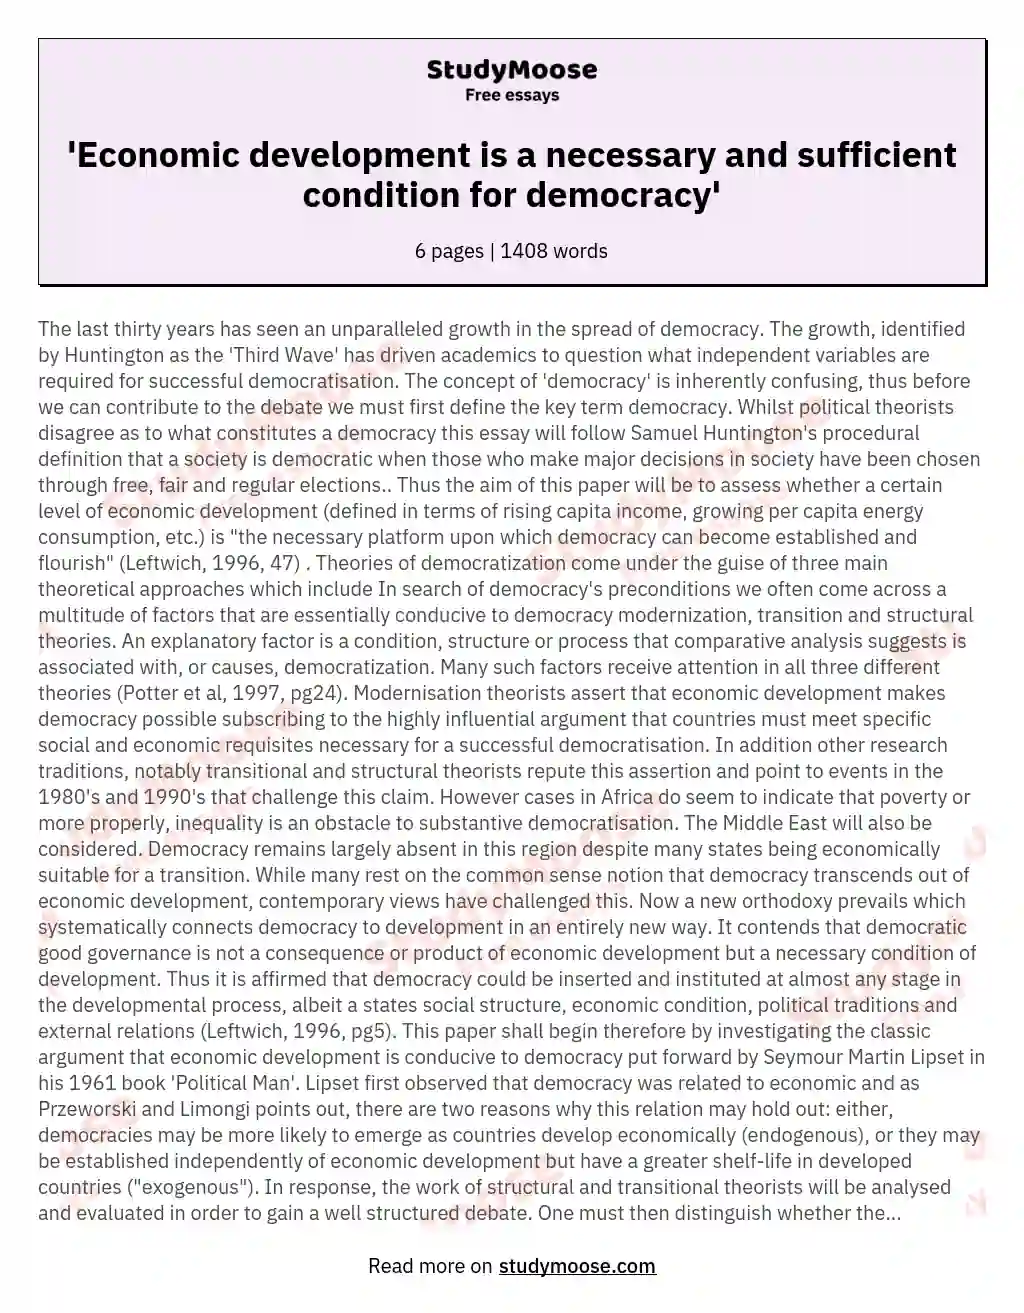 'Economic development is a necessary and sufficient condition for democracy' essay